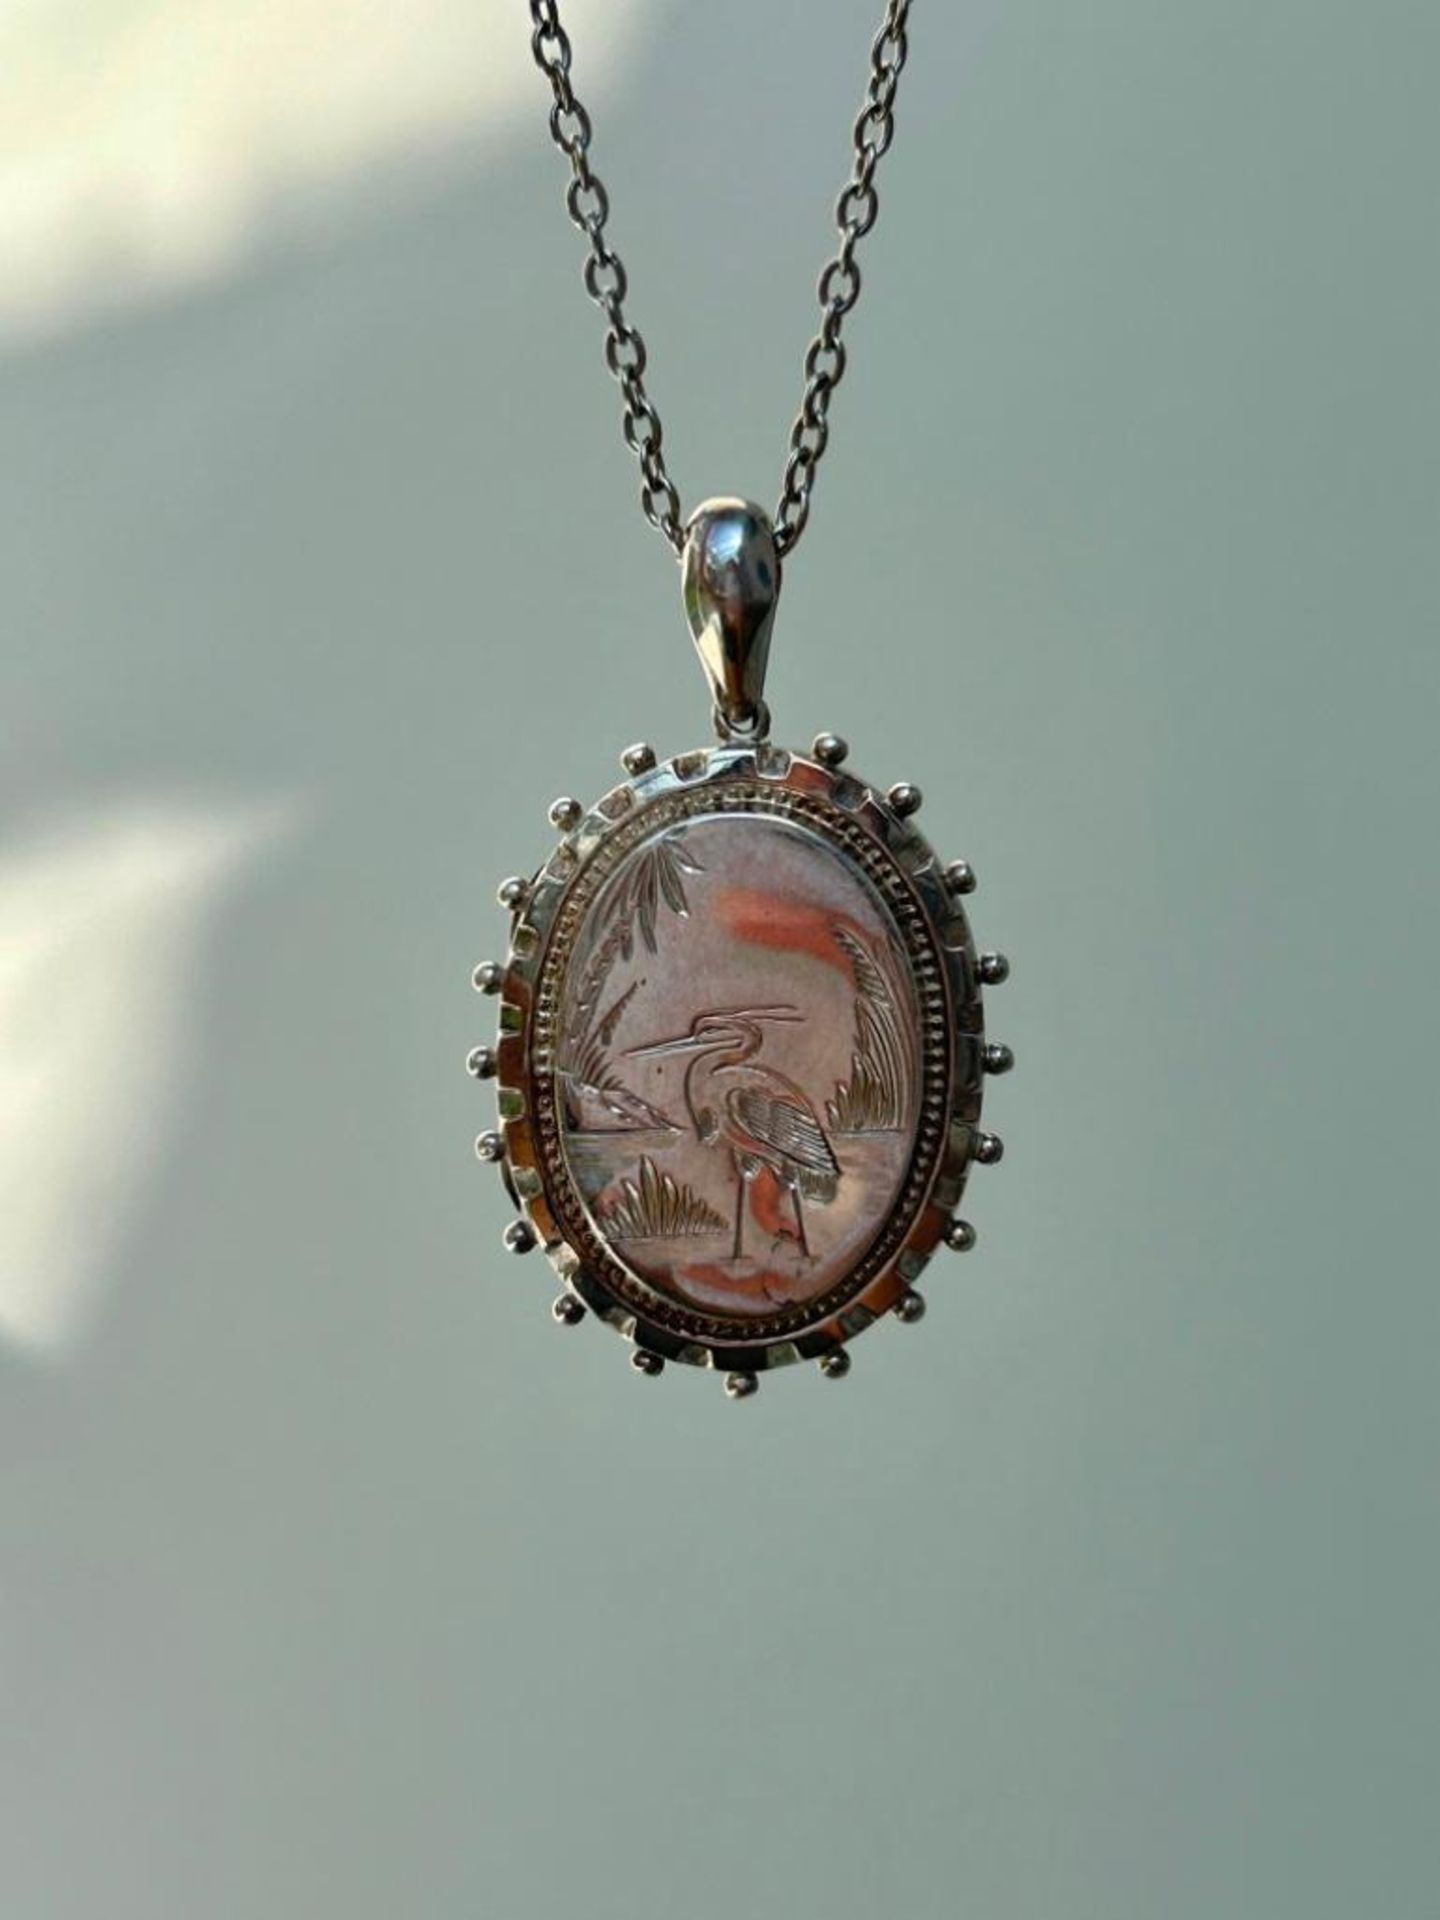 Victorian Era Aesthetic Silver Pendant on Chain - Image 3 of 5